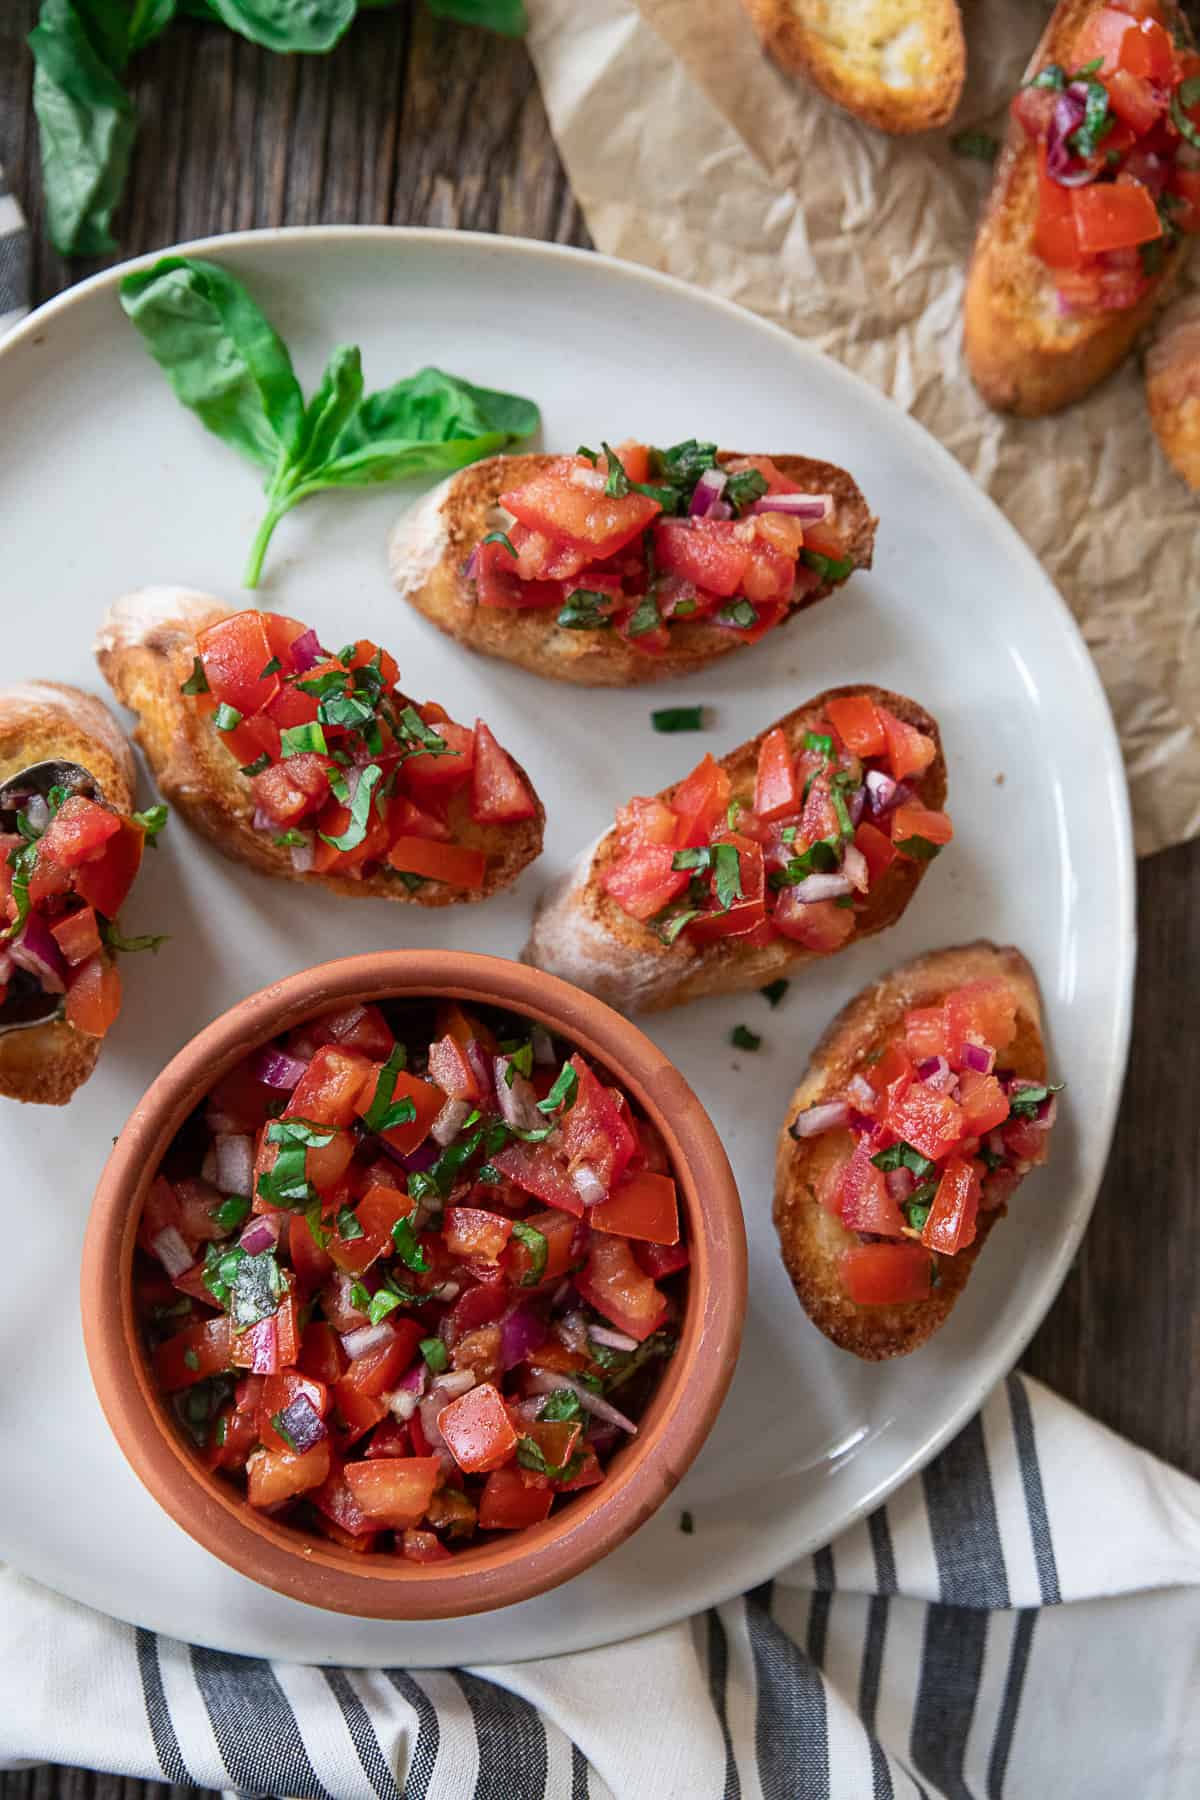 Authentic and classic Italian Bruschetta served on a classic white plate with a small bowl of the bruschetta mix and basil as garnish